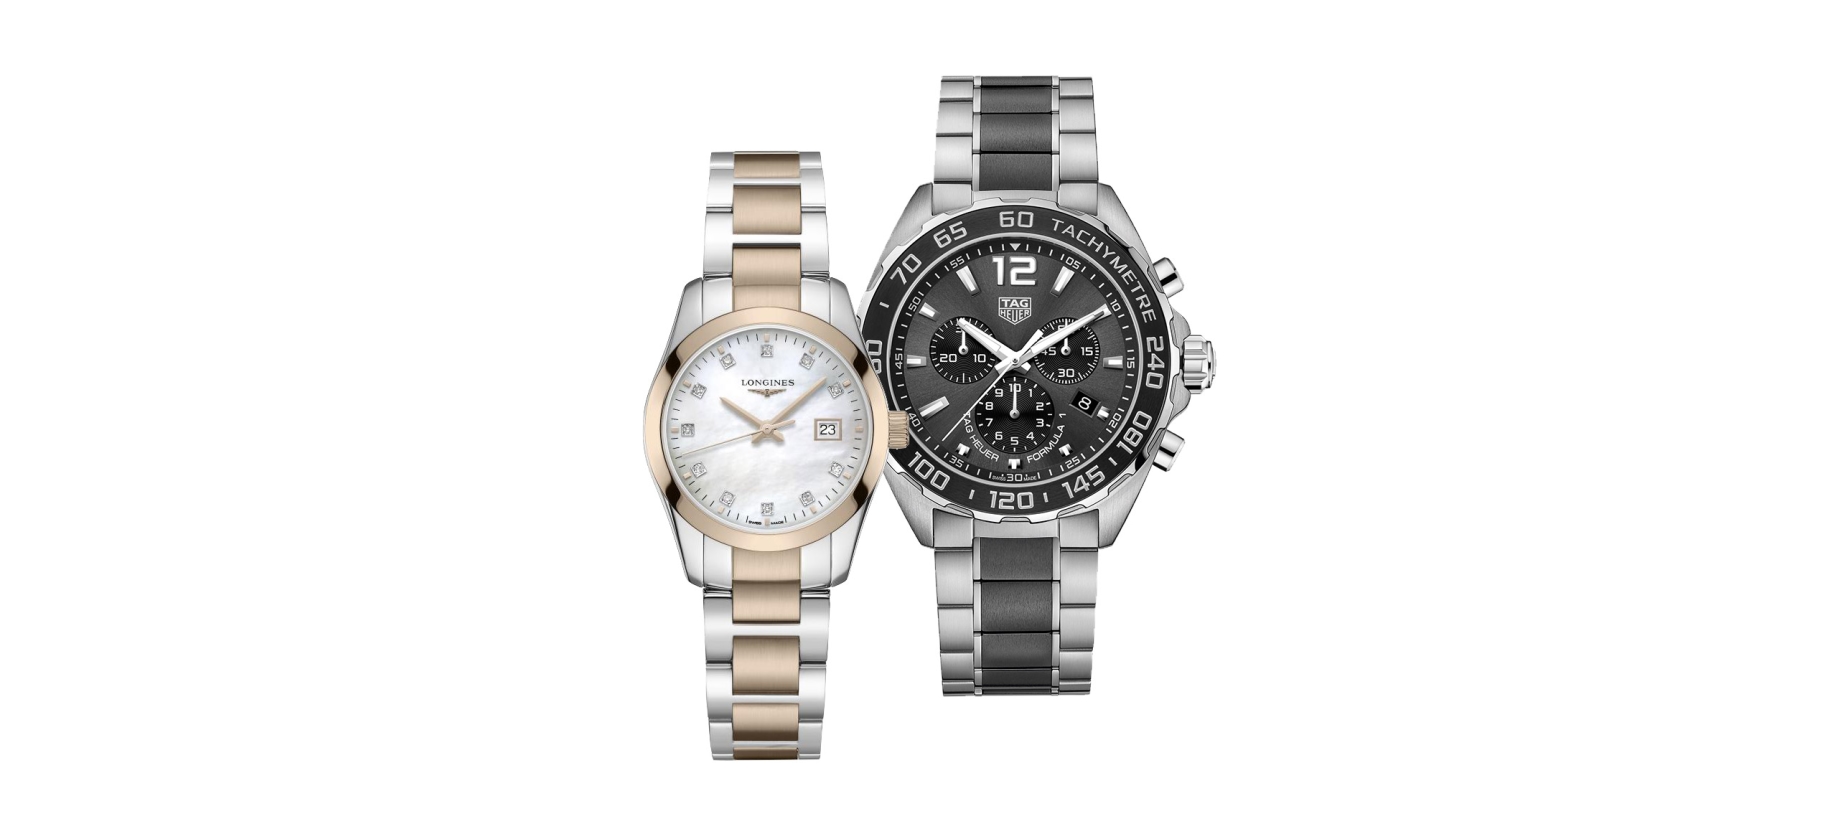 Longines and TAG Heuer Watches